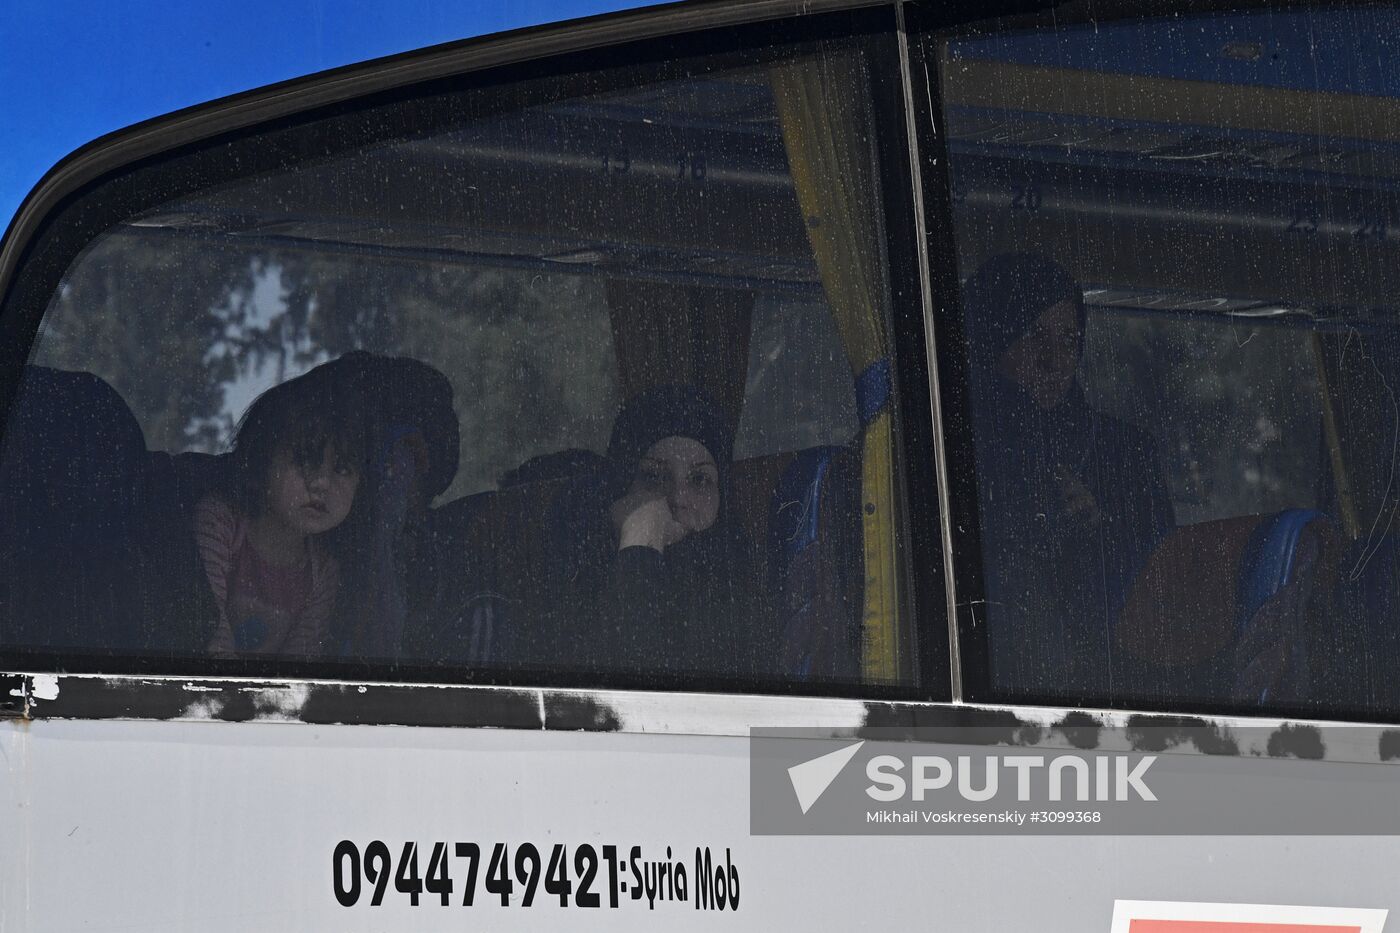 Militants and their families leave Damascus